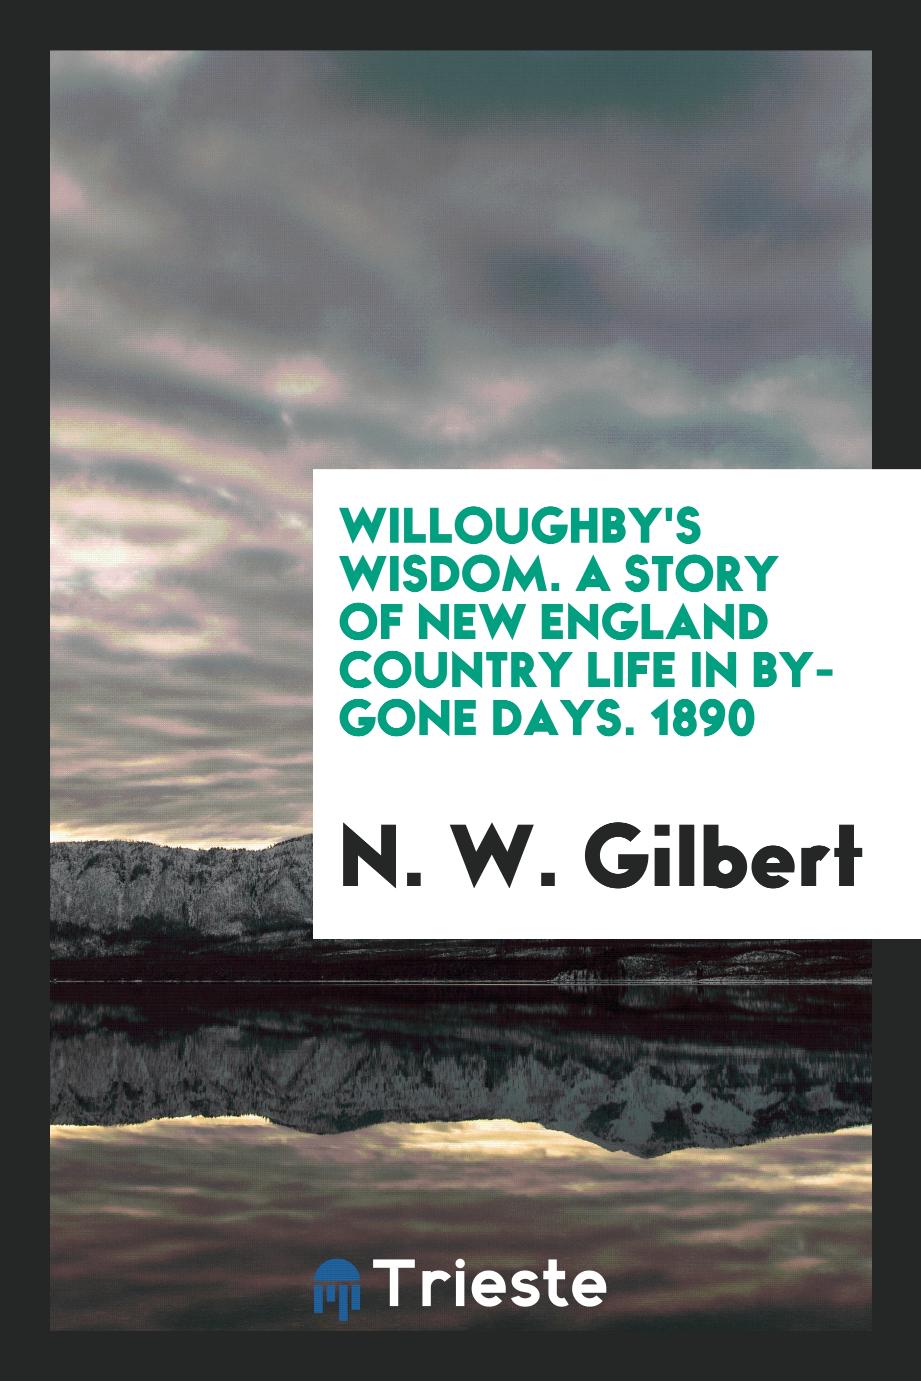 Willoughby's Wisdom. A Story of New England Country Life in By-Gone Days. 1890